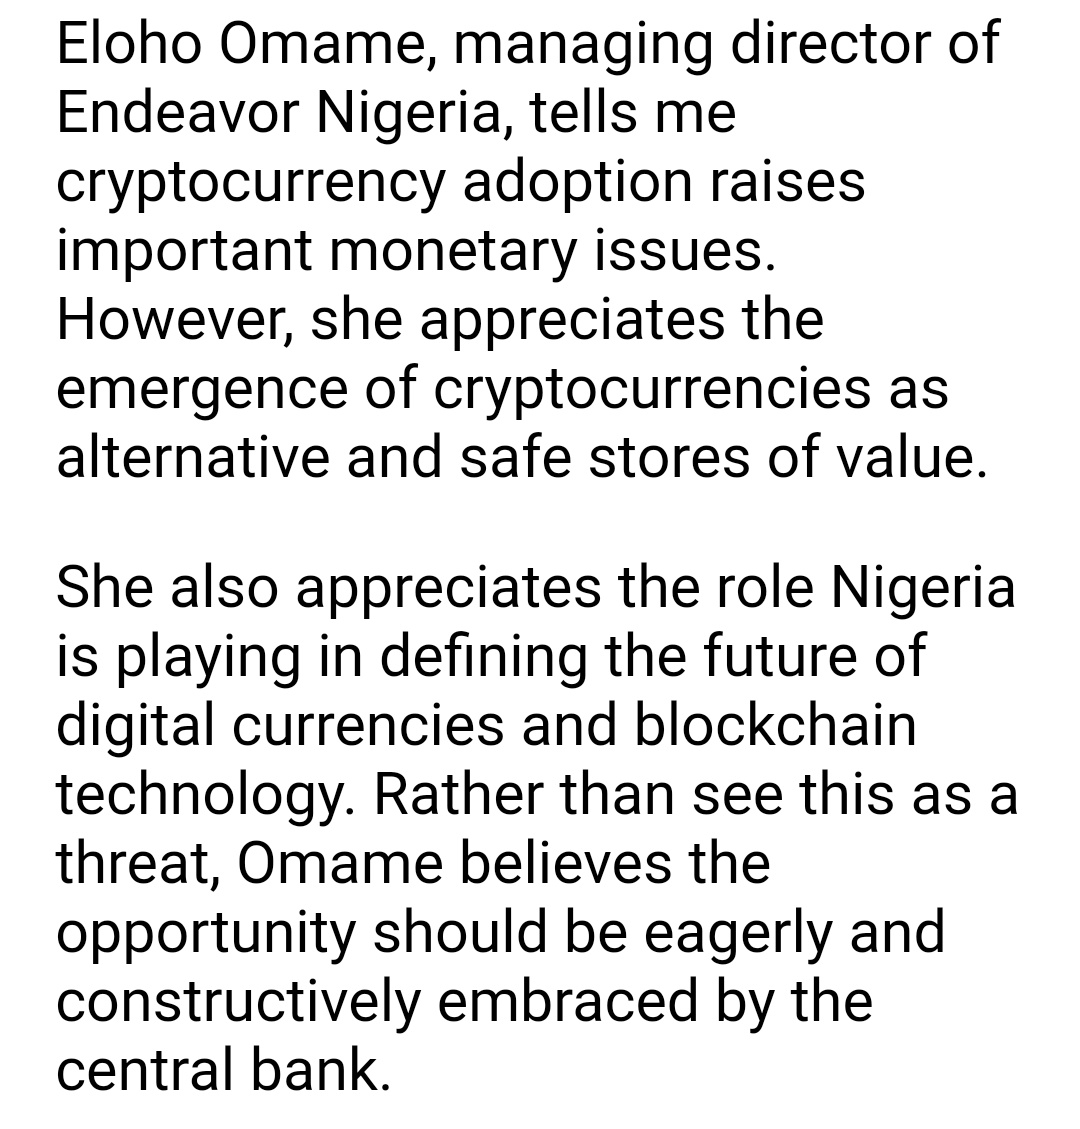 By enabling P2P, crypto exchanges become more integral to the crypto system. @ElohoGM appreciates the role Nigeria is playing in defining crypto and it's underlying blockchain technology.